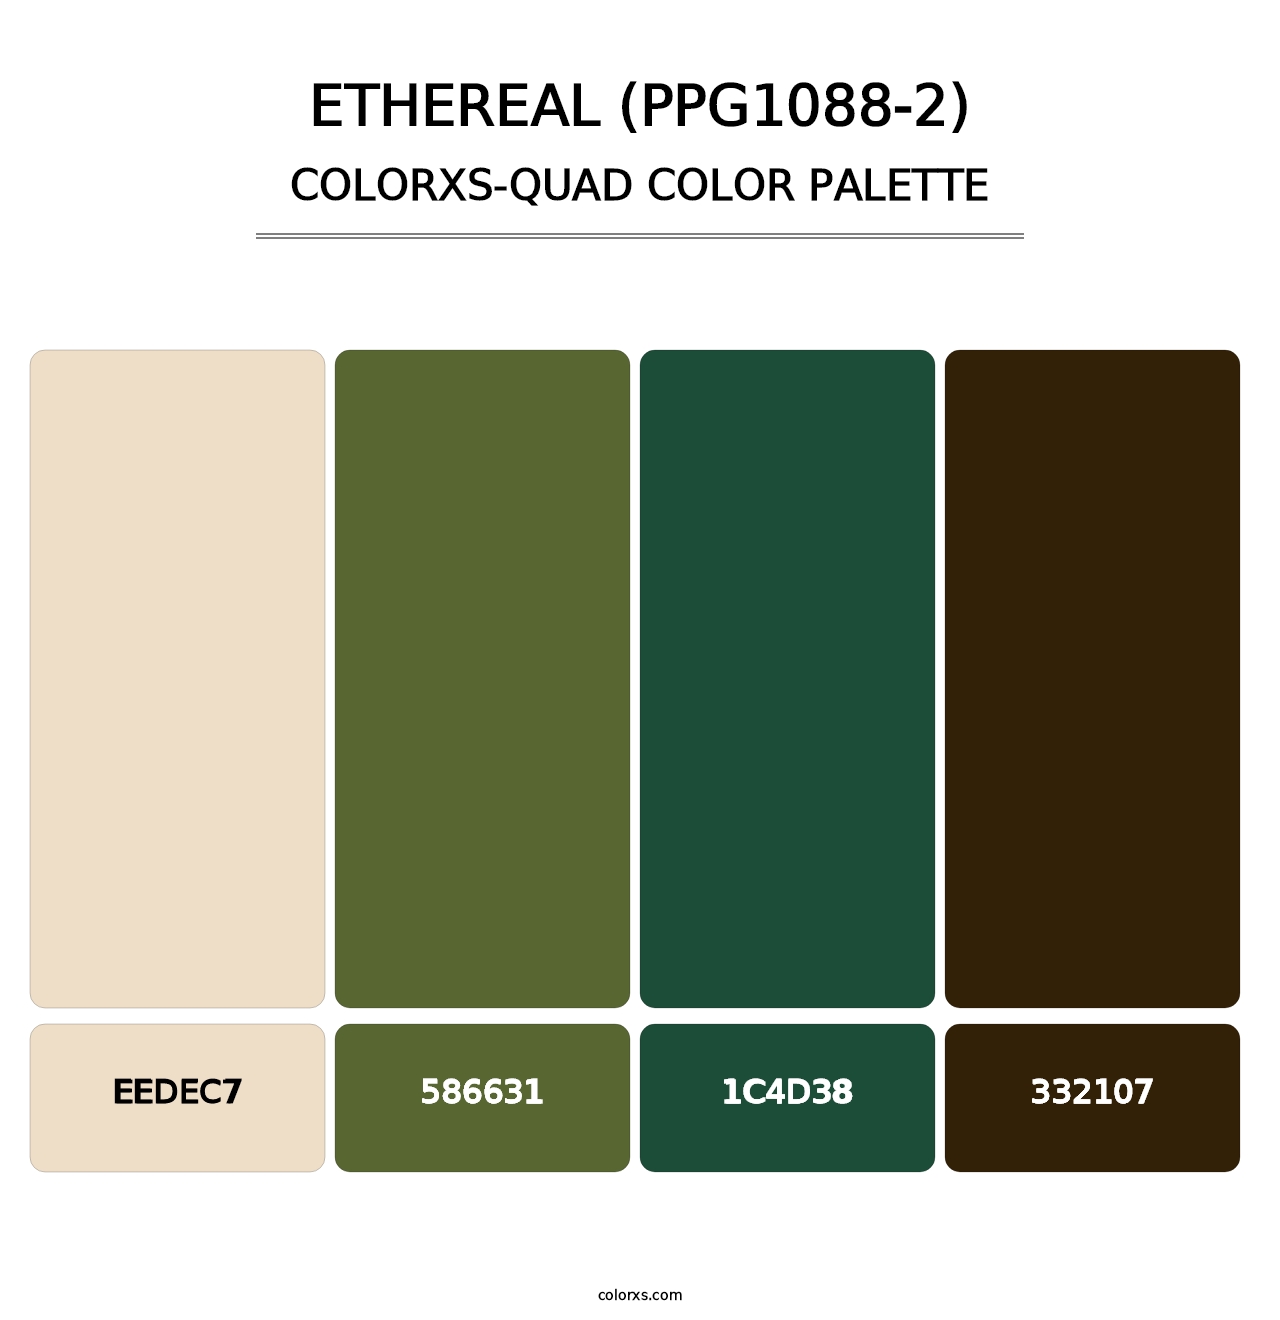 Ethereal (PPG1088-2) - Colorxs Quad Palette